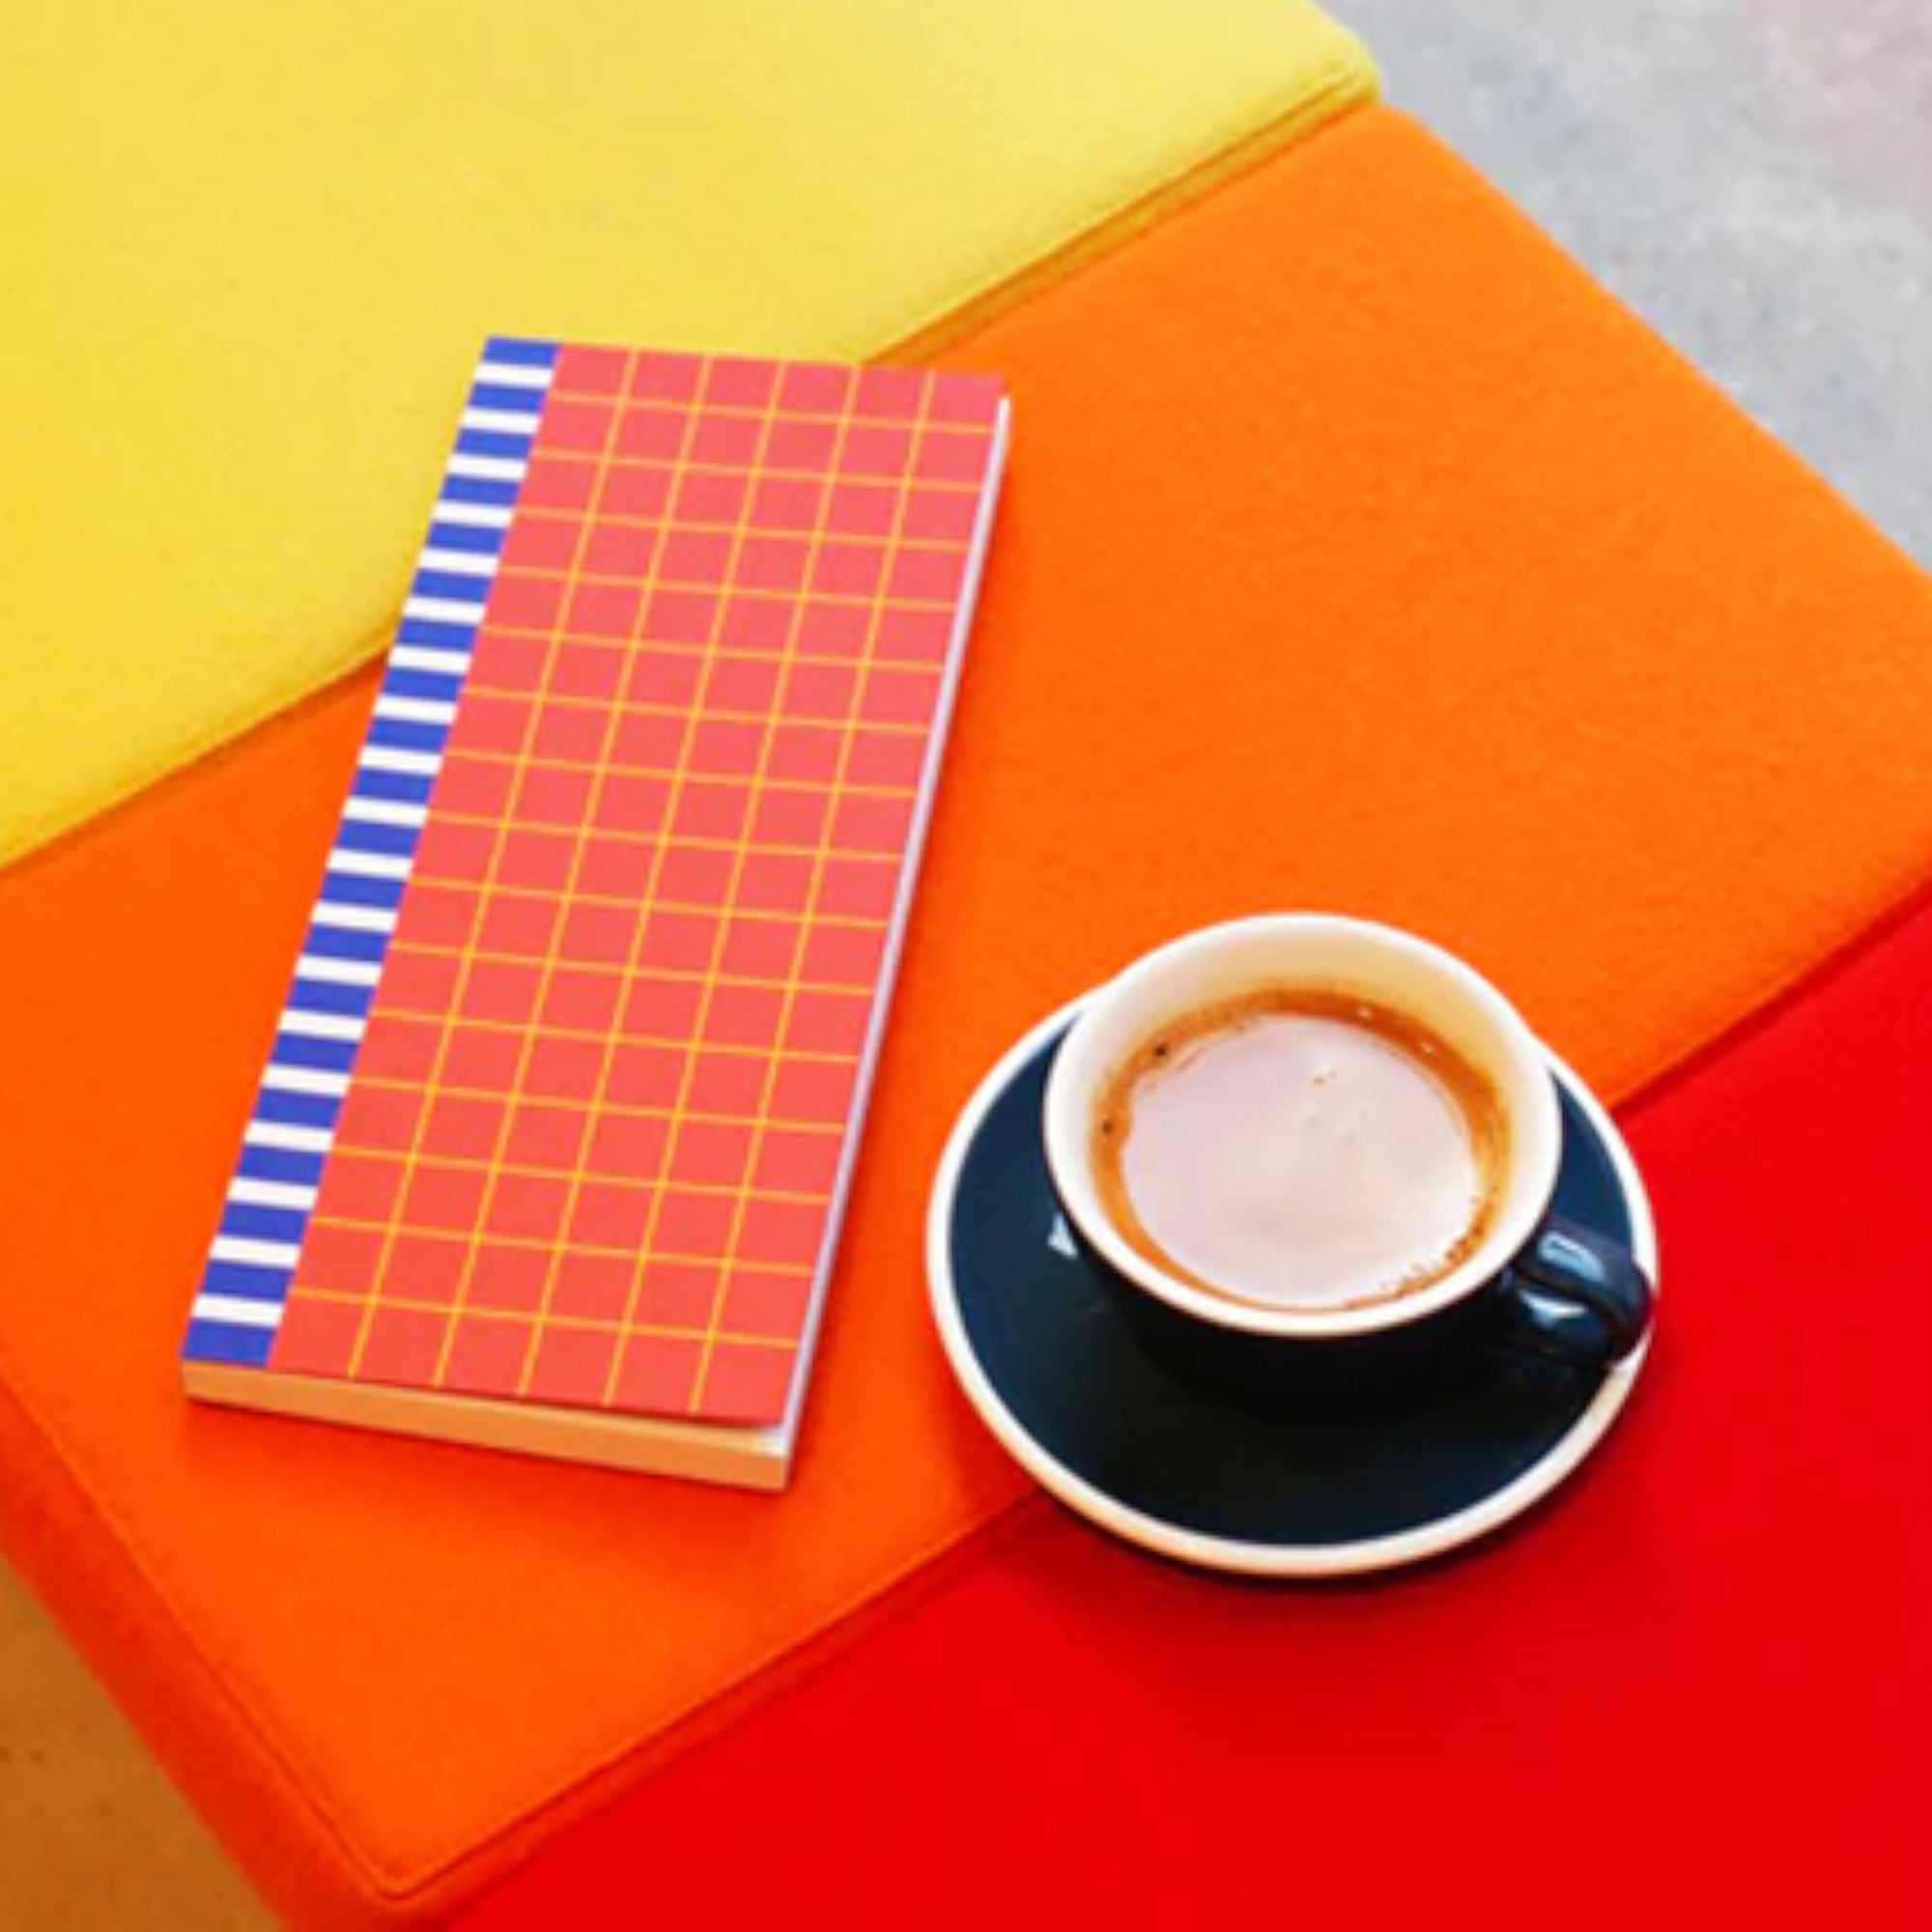 TILES NOTEBOOK (VARIOUS COLORS) Tiles notebook by Hey. In 2014, graphic design and illustration studio Hey launched an online shop. HeyShop is the place where personal creations get shared with the public. Geometrical, colourful, typographical and bold designs and illustrations are brought to posters, tote bags, books and notebooks.Specifications: Colors: Red / Lavander / Green